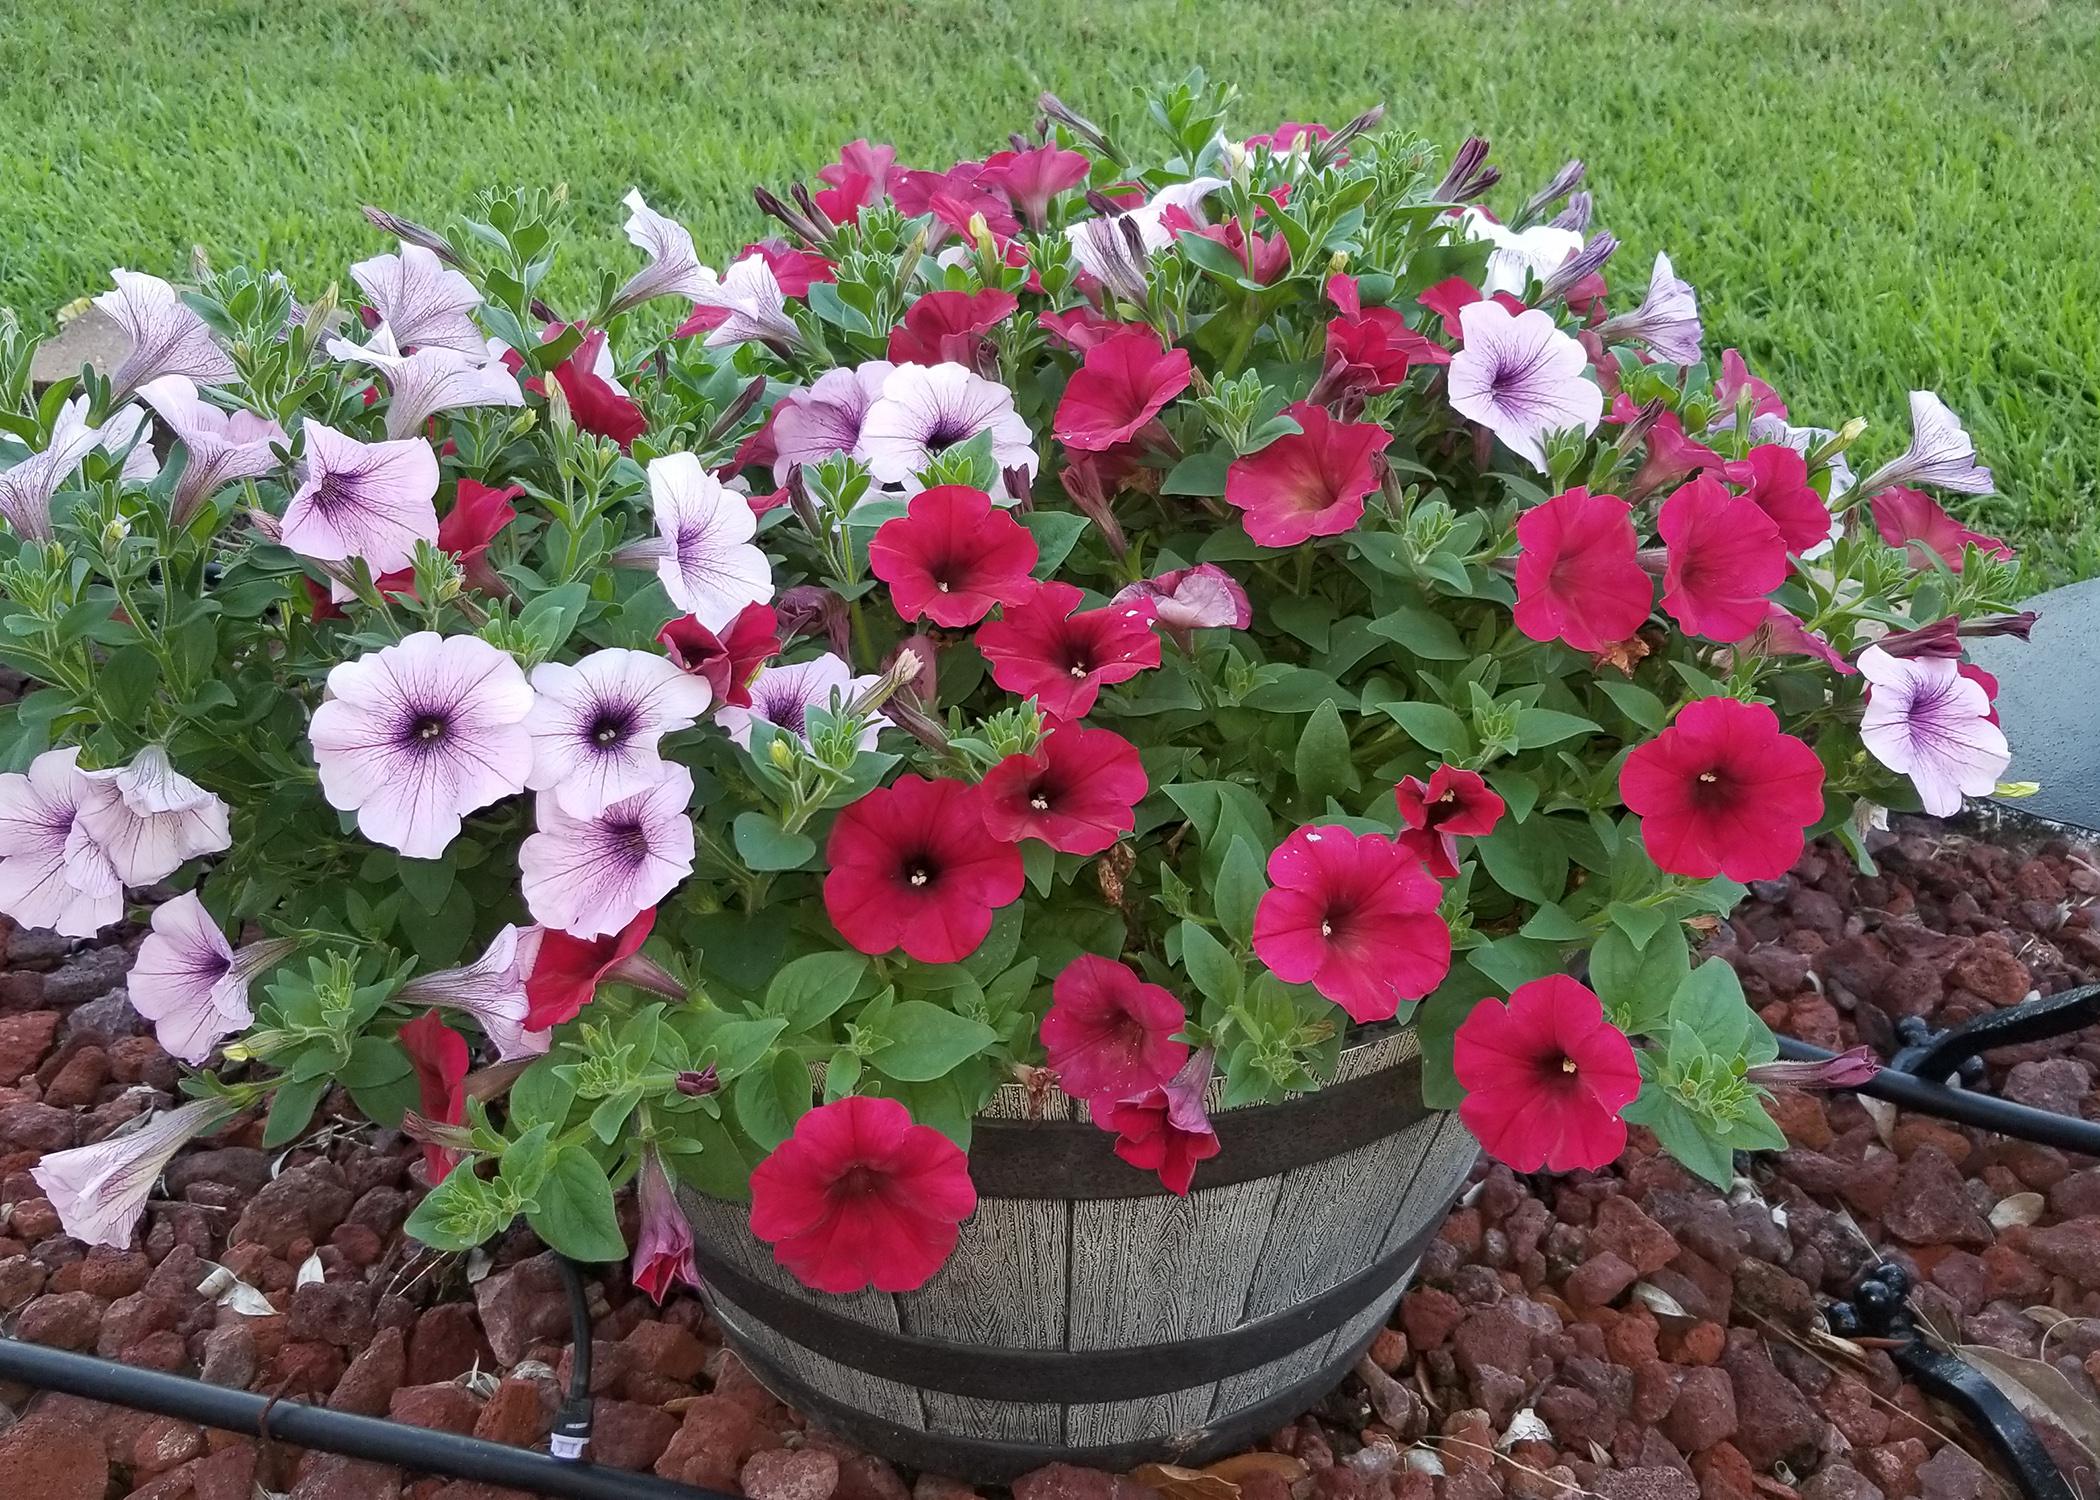 Red and white flowers with purple centers cover a plant growing from a wooden barrel.